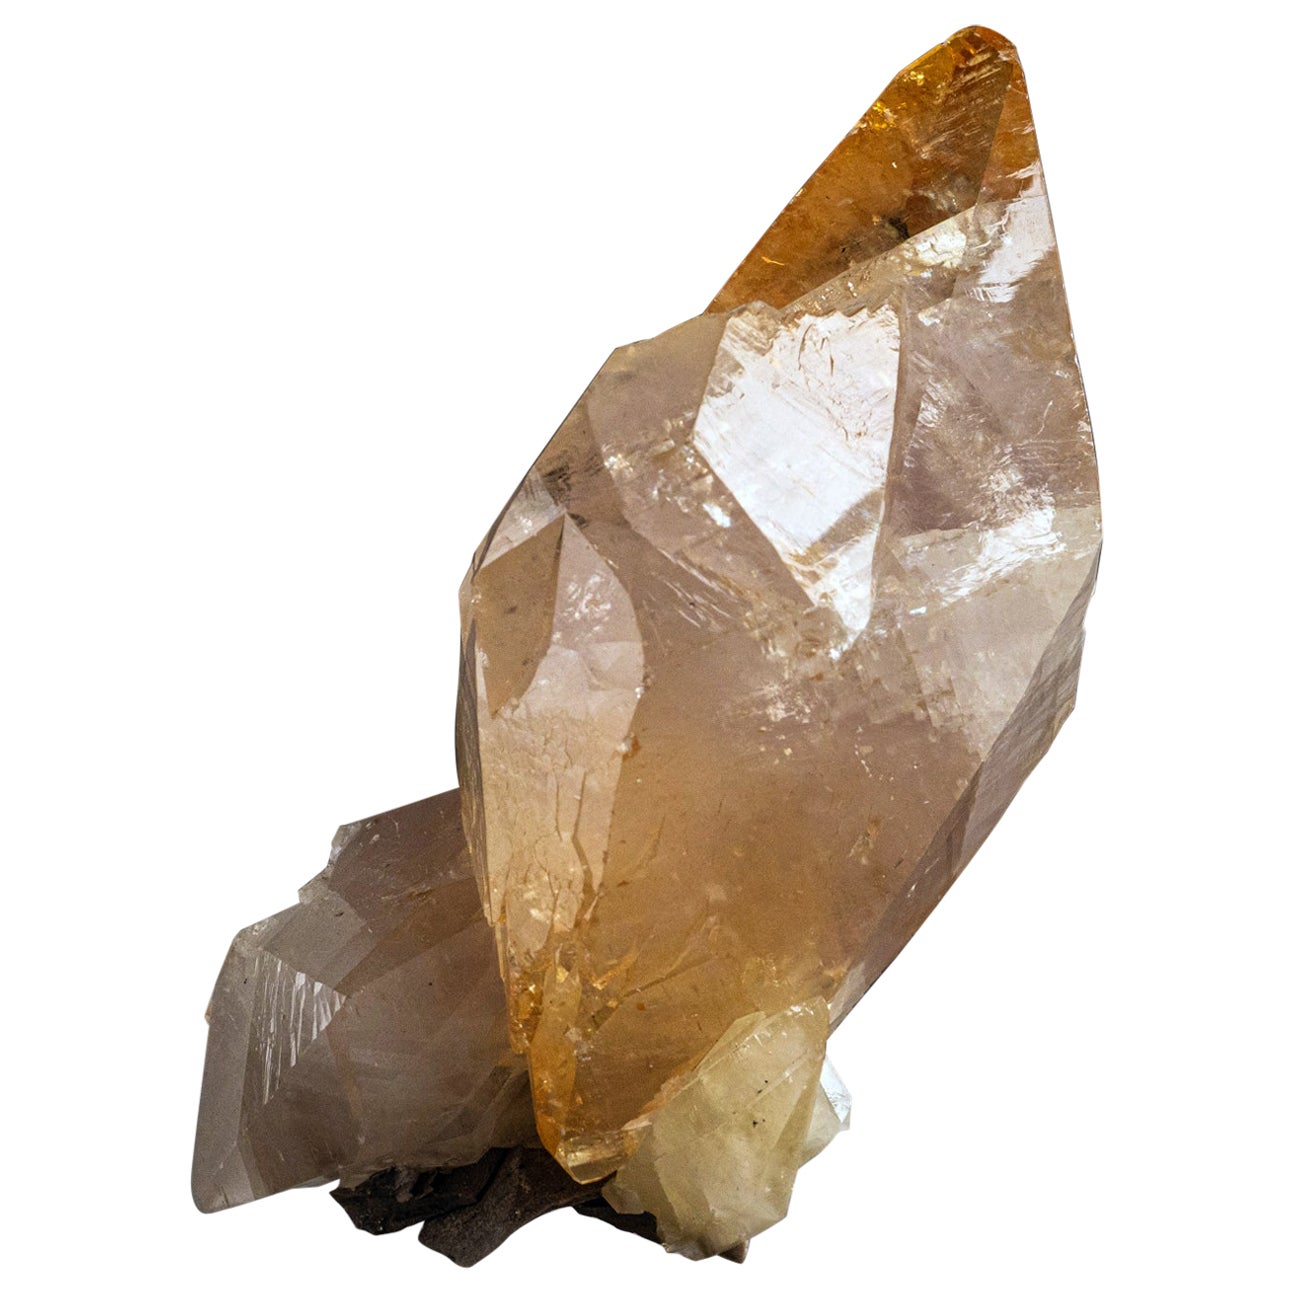 Golden Calcite Crystal from Elmwood Mine, Tennessee (4 lbs)